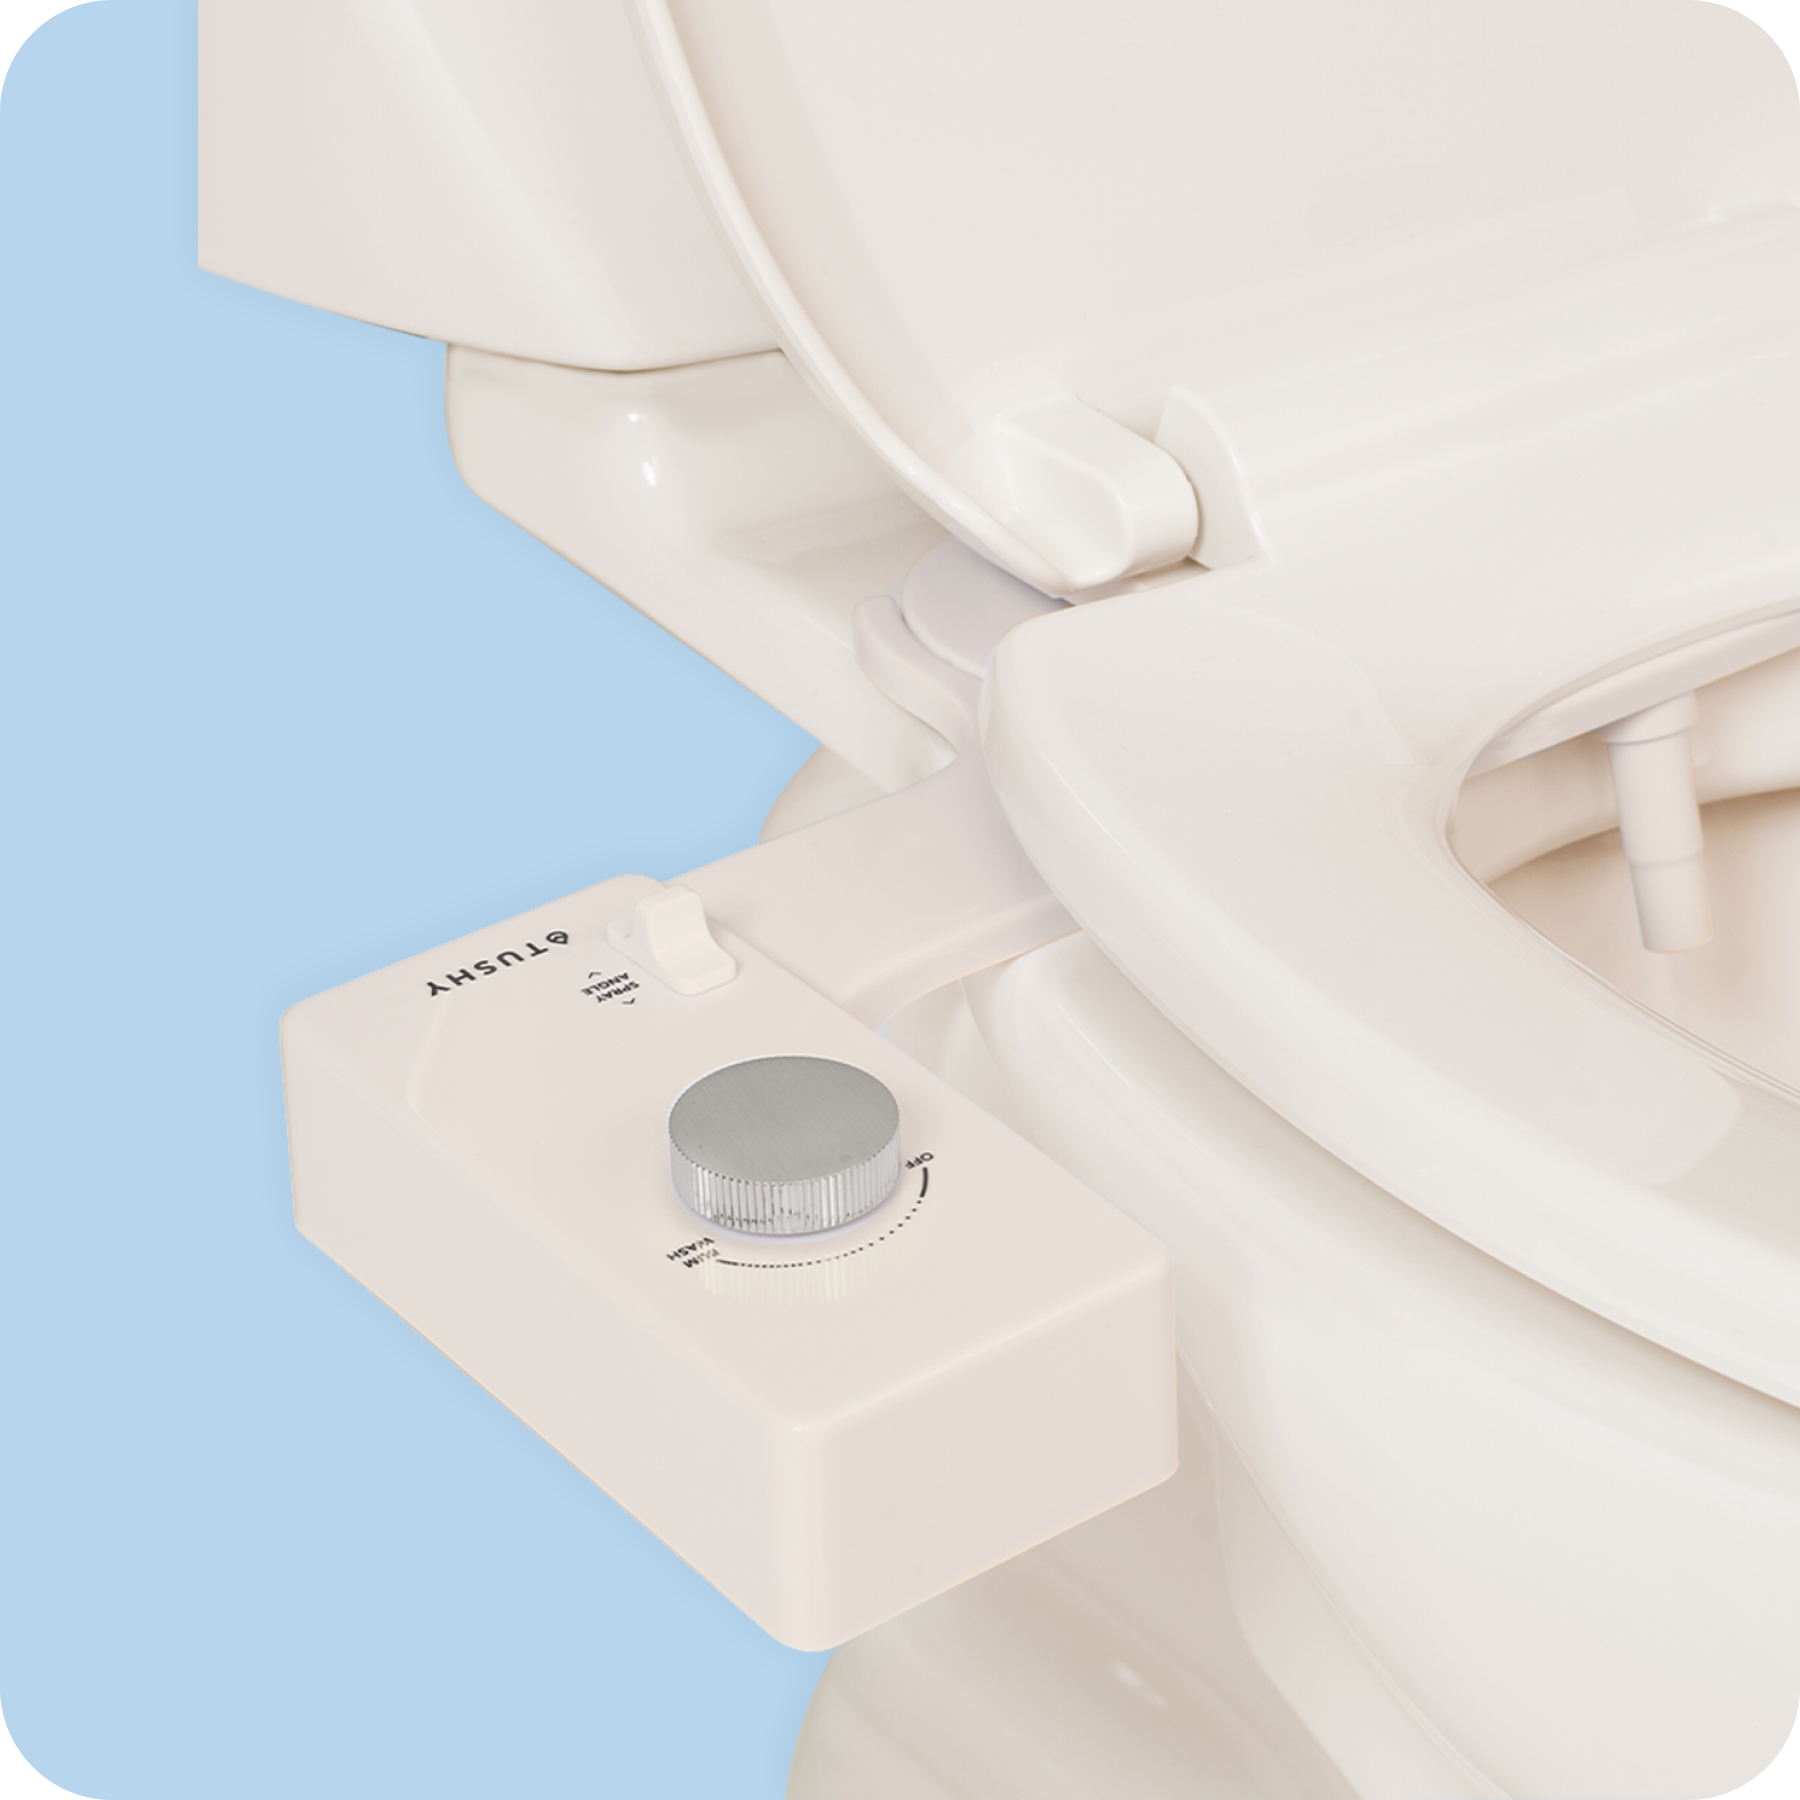 Tushy Classic 3.0 Biscuit/Platinum - a classic affordable bidet attachment by TUSHY